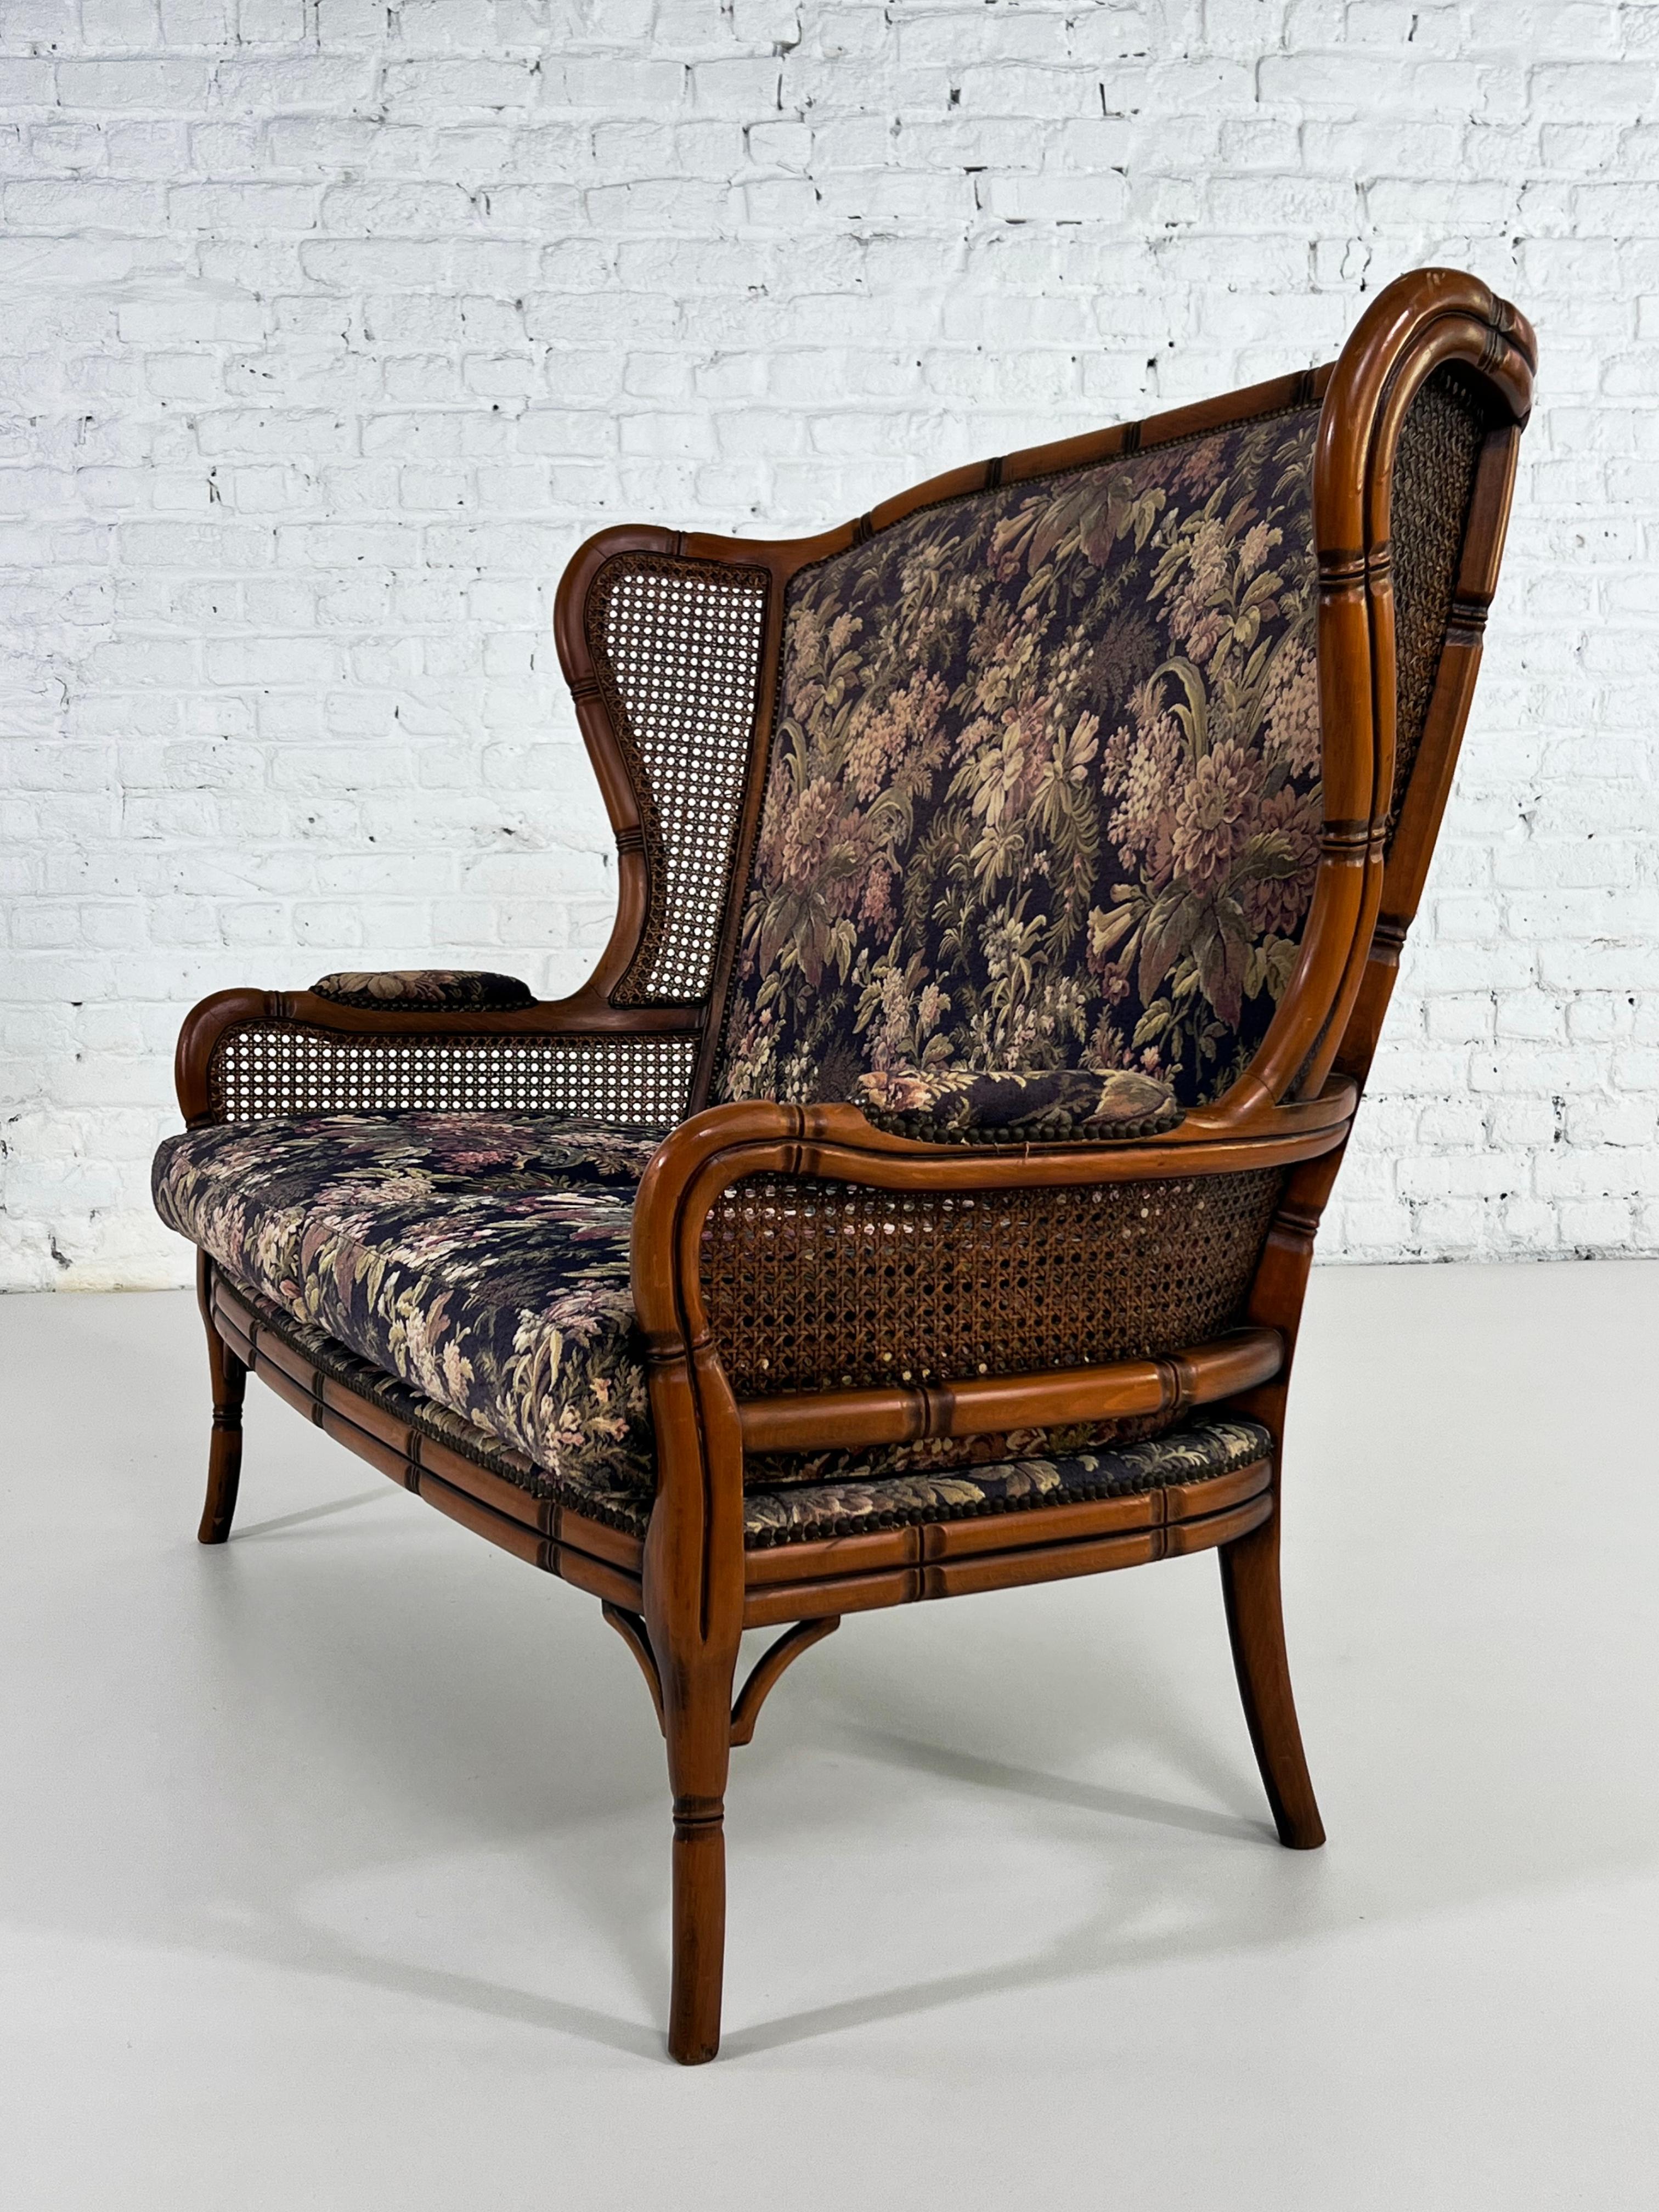 Italian design two seater sofa with sculpted wooden structure bamboo effect, wicker cane wingback finishes adorned with a romantic deep blue and colored floral fabric
 